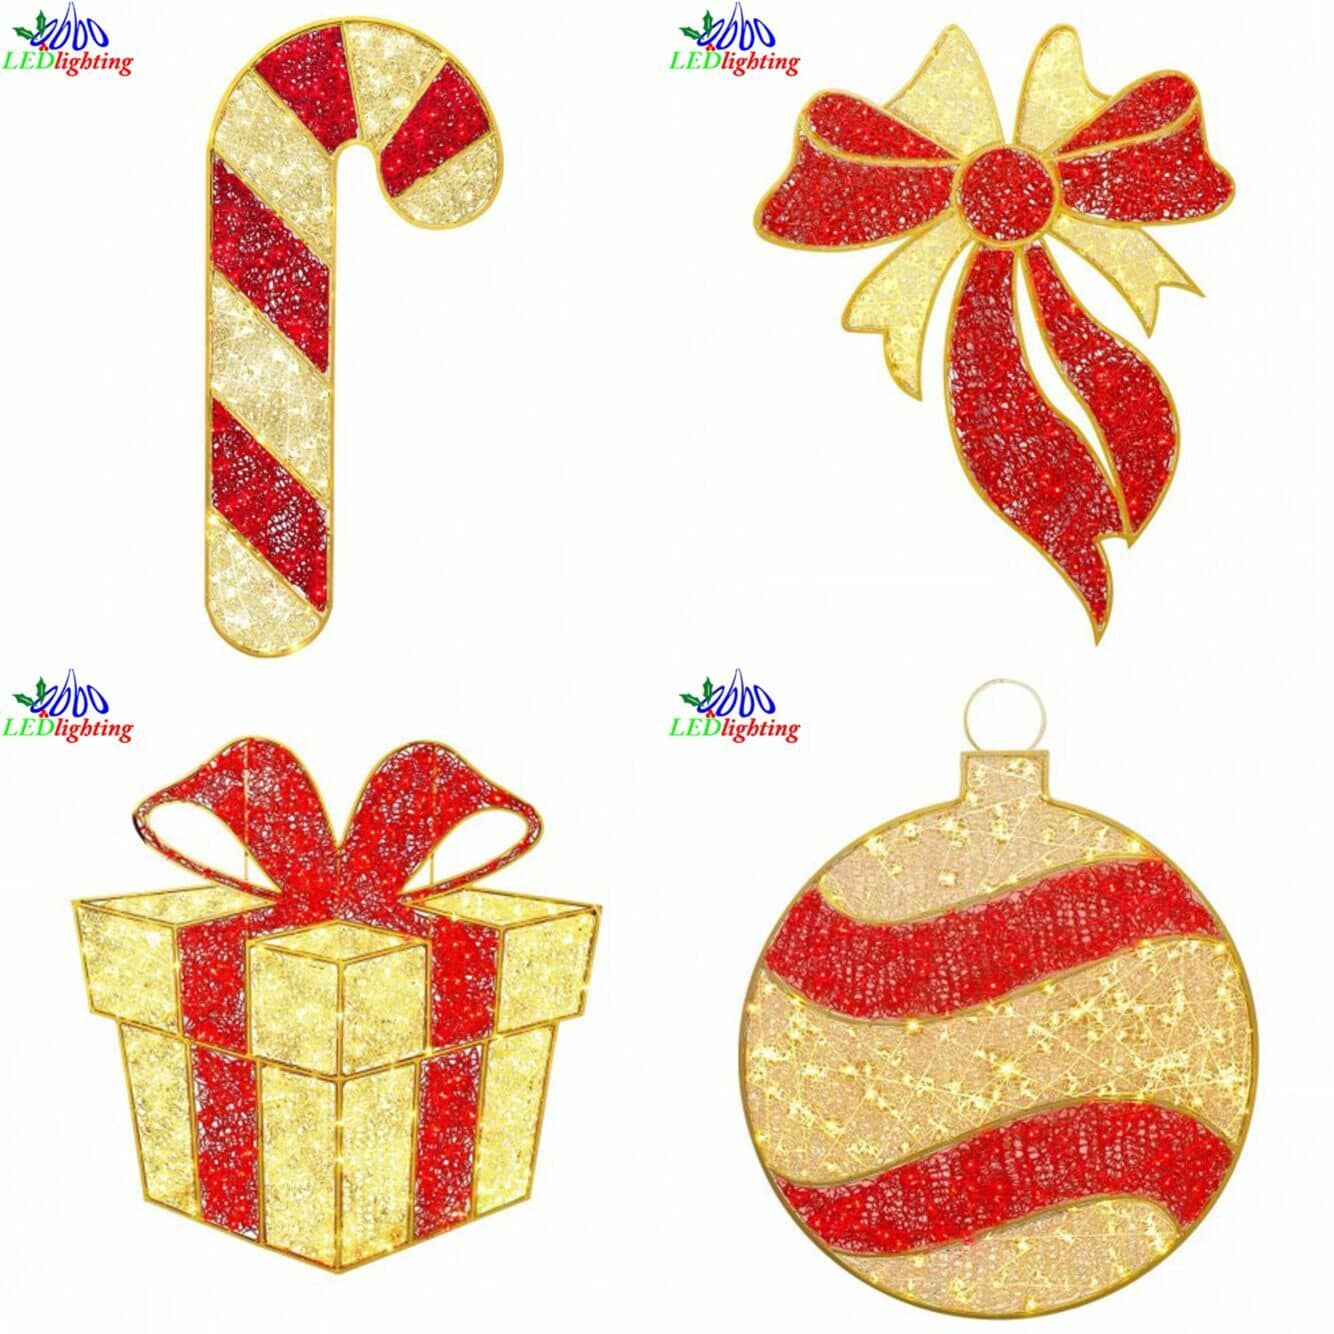 Acrylic decorative candy cane and ball